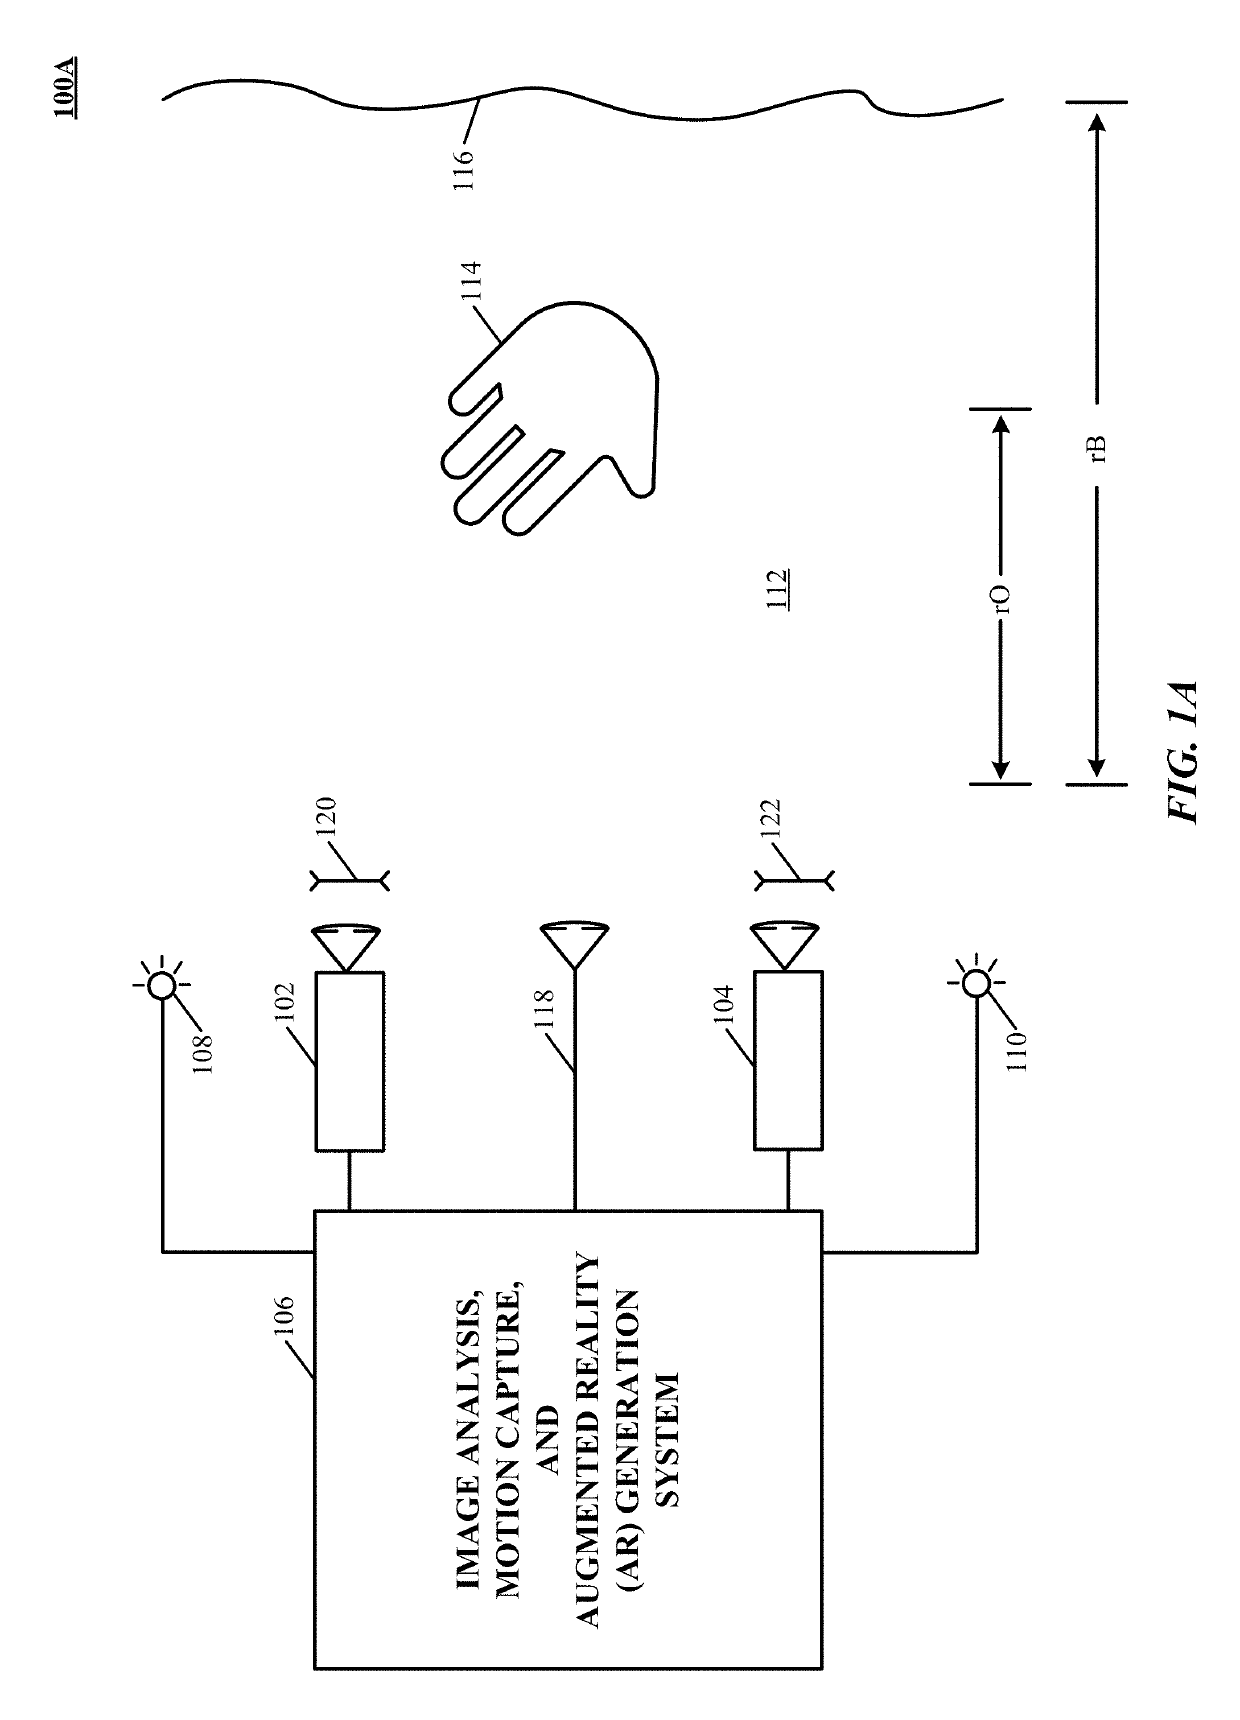 Systems and methods of free-space gestural interaction